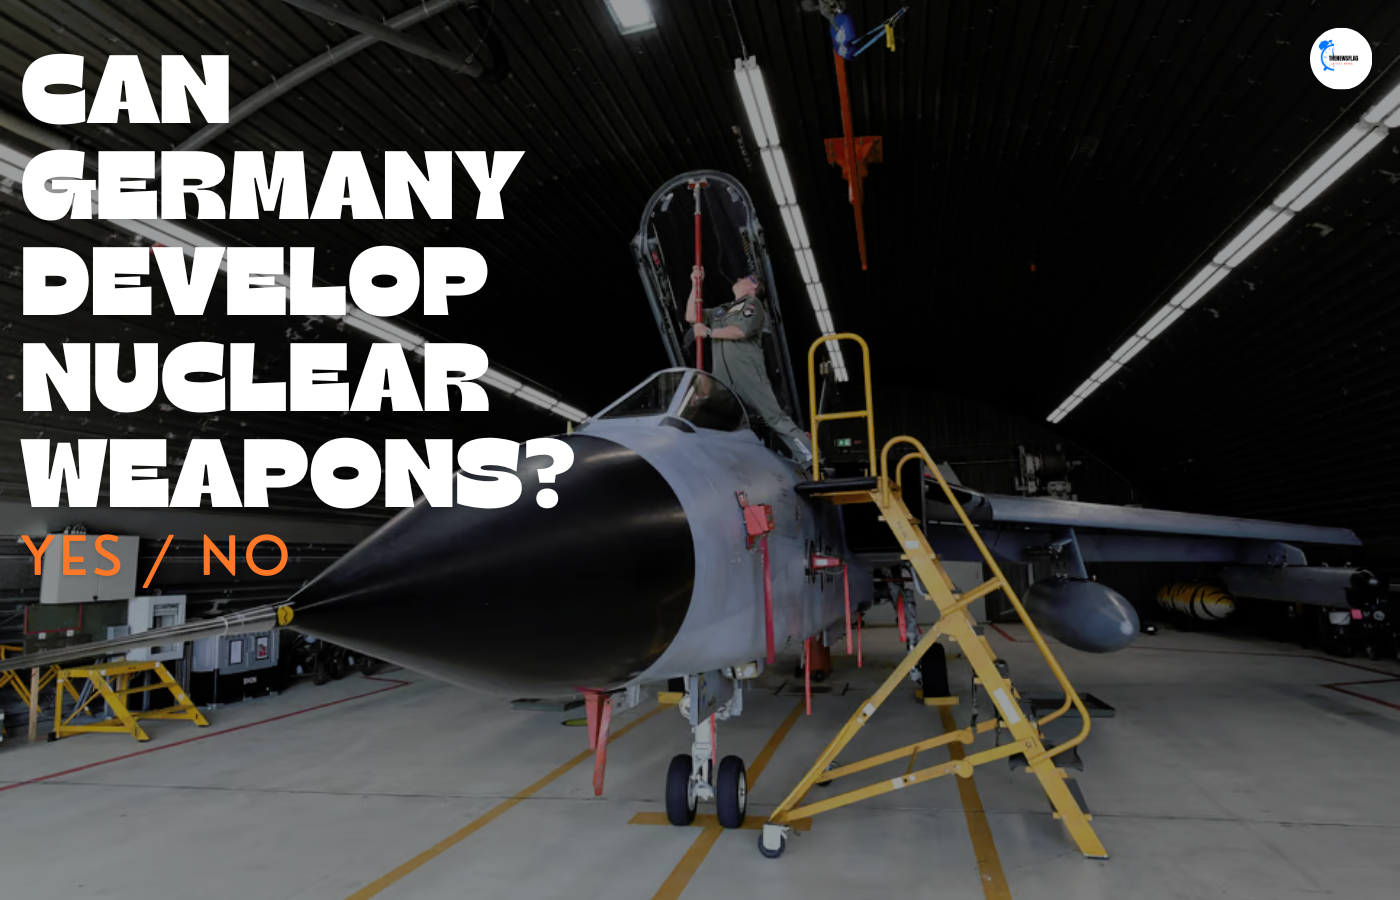 Can Germany Develop Nuclear Weapons?